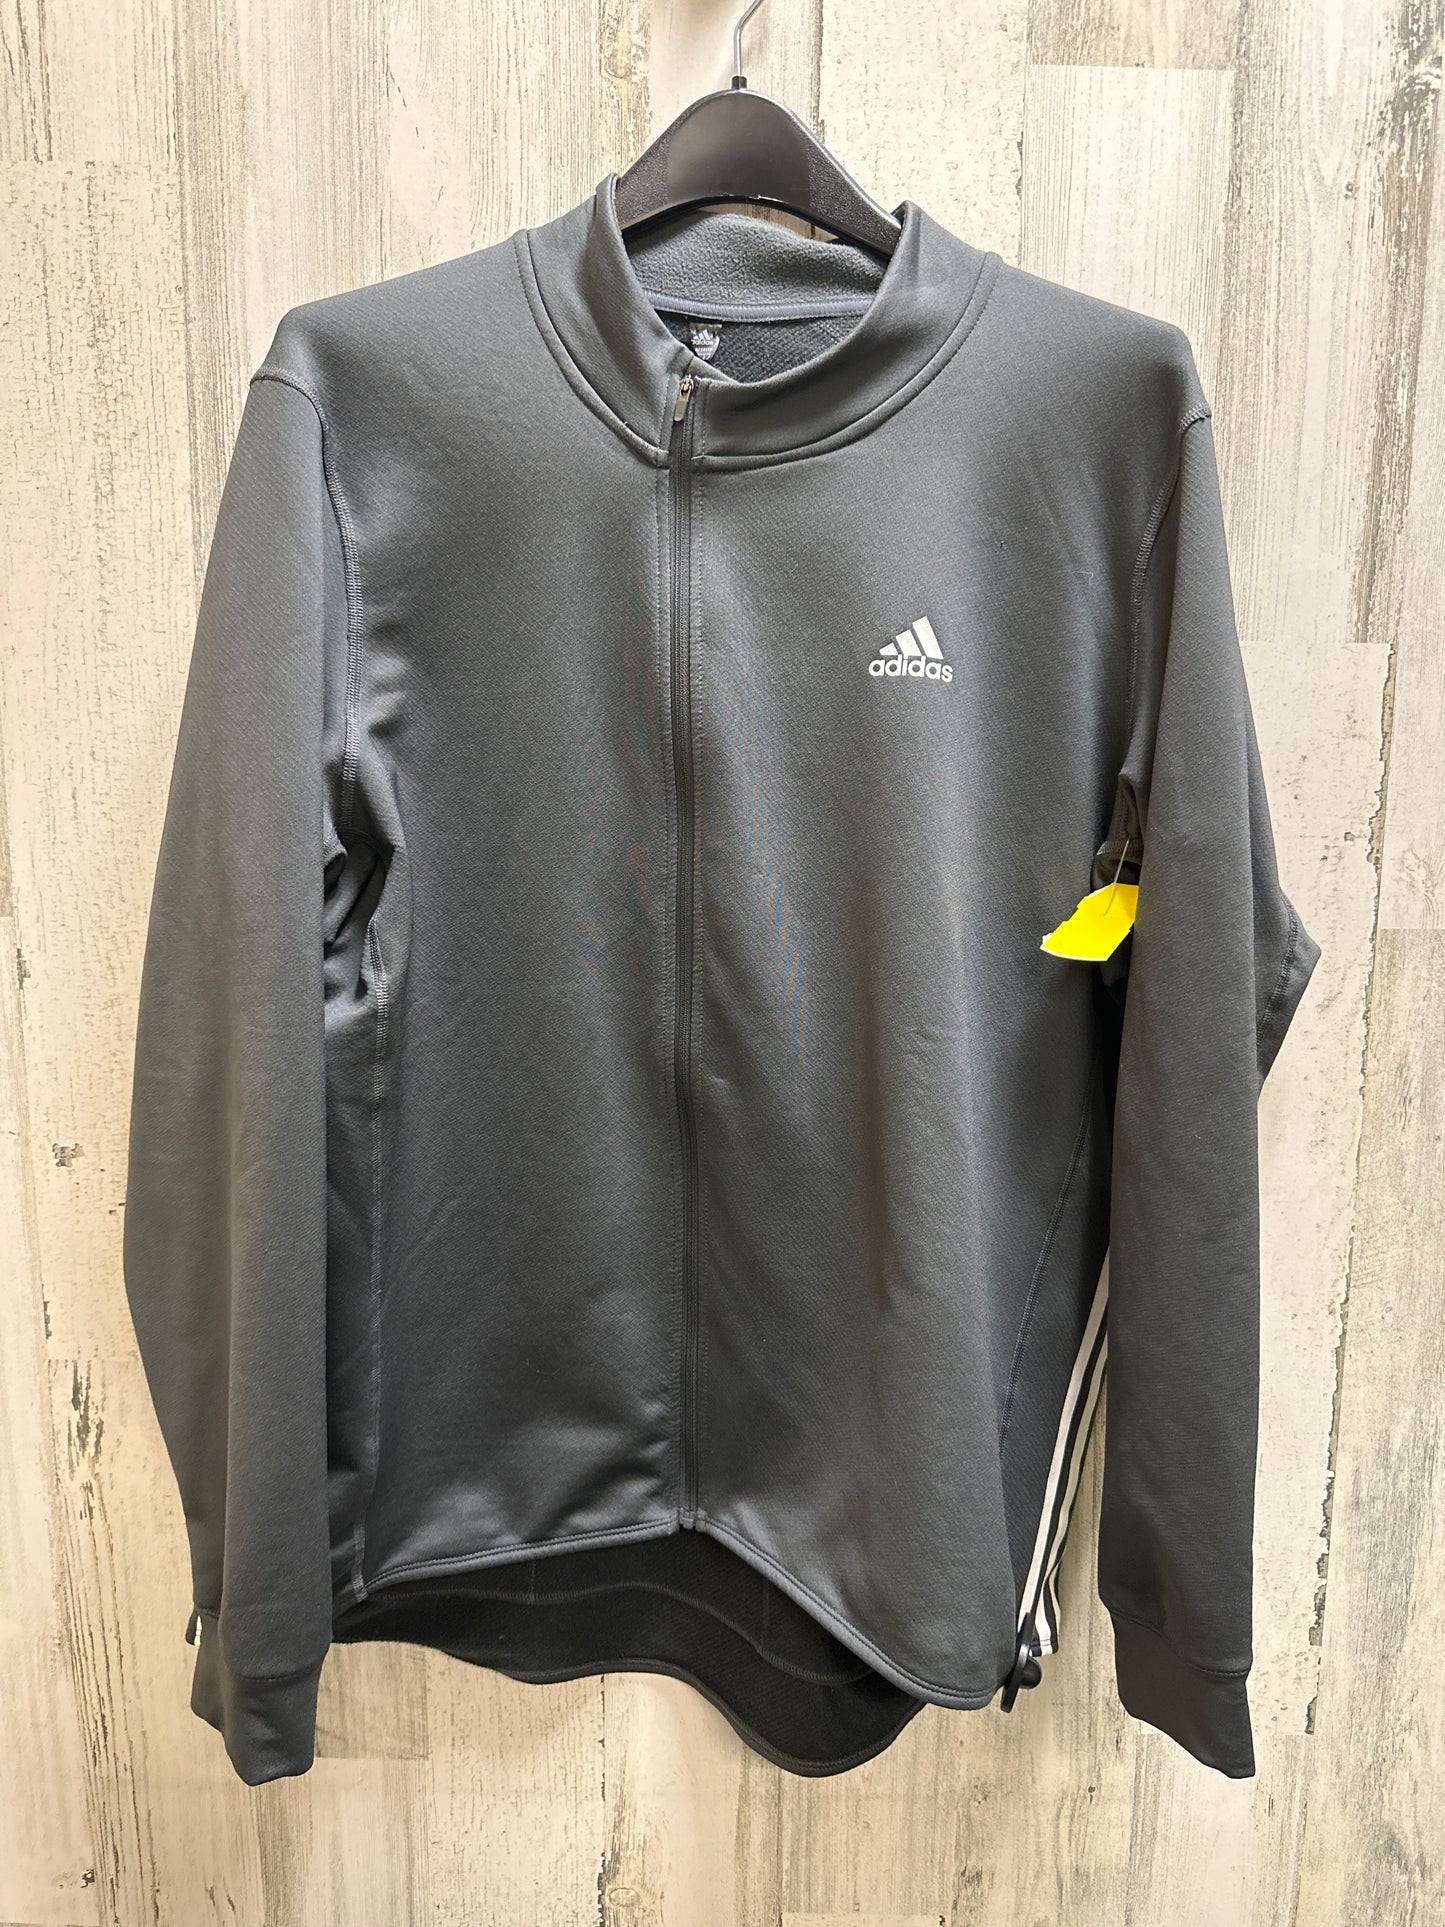 Jacket Other By Adidas  Size: 2x